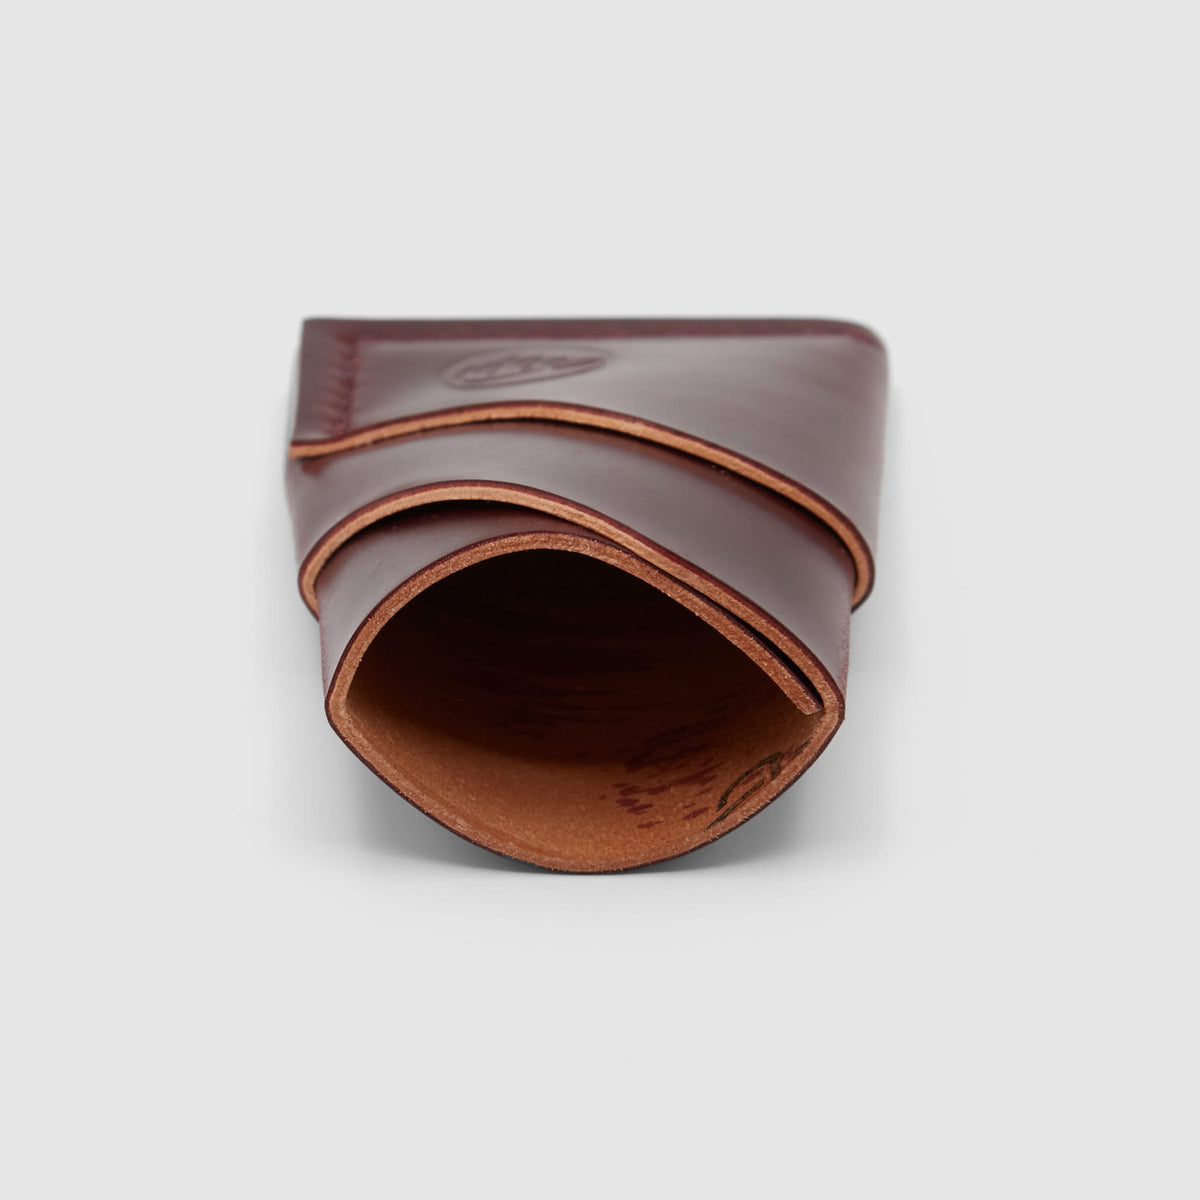 Oldpassion Shell Cordovan Leather Crad Holder